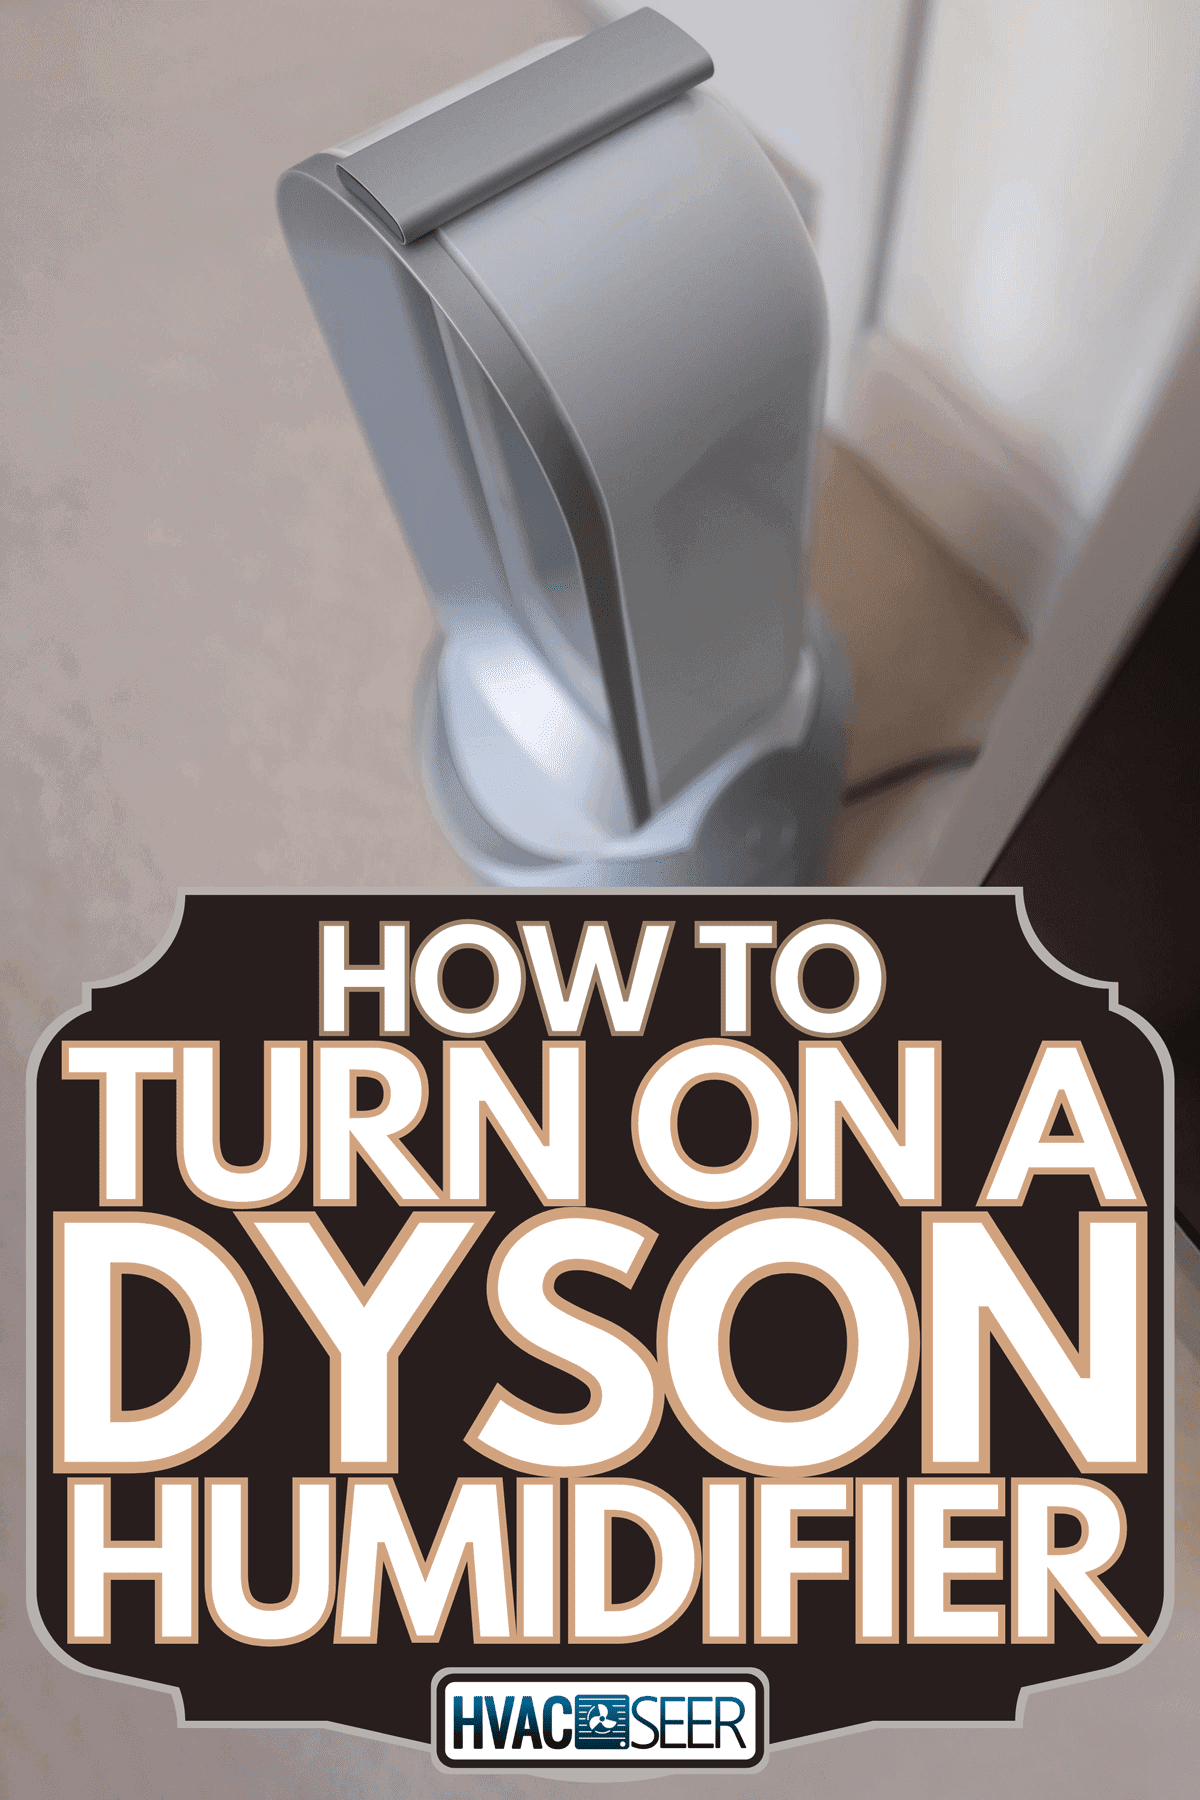 Dyson humidifier in the corner of a room, How To Turn On A Dyson Humidifier